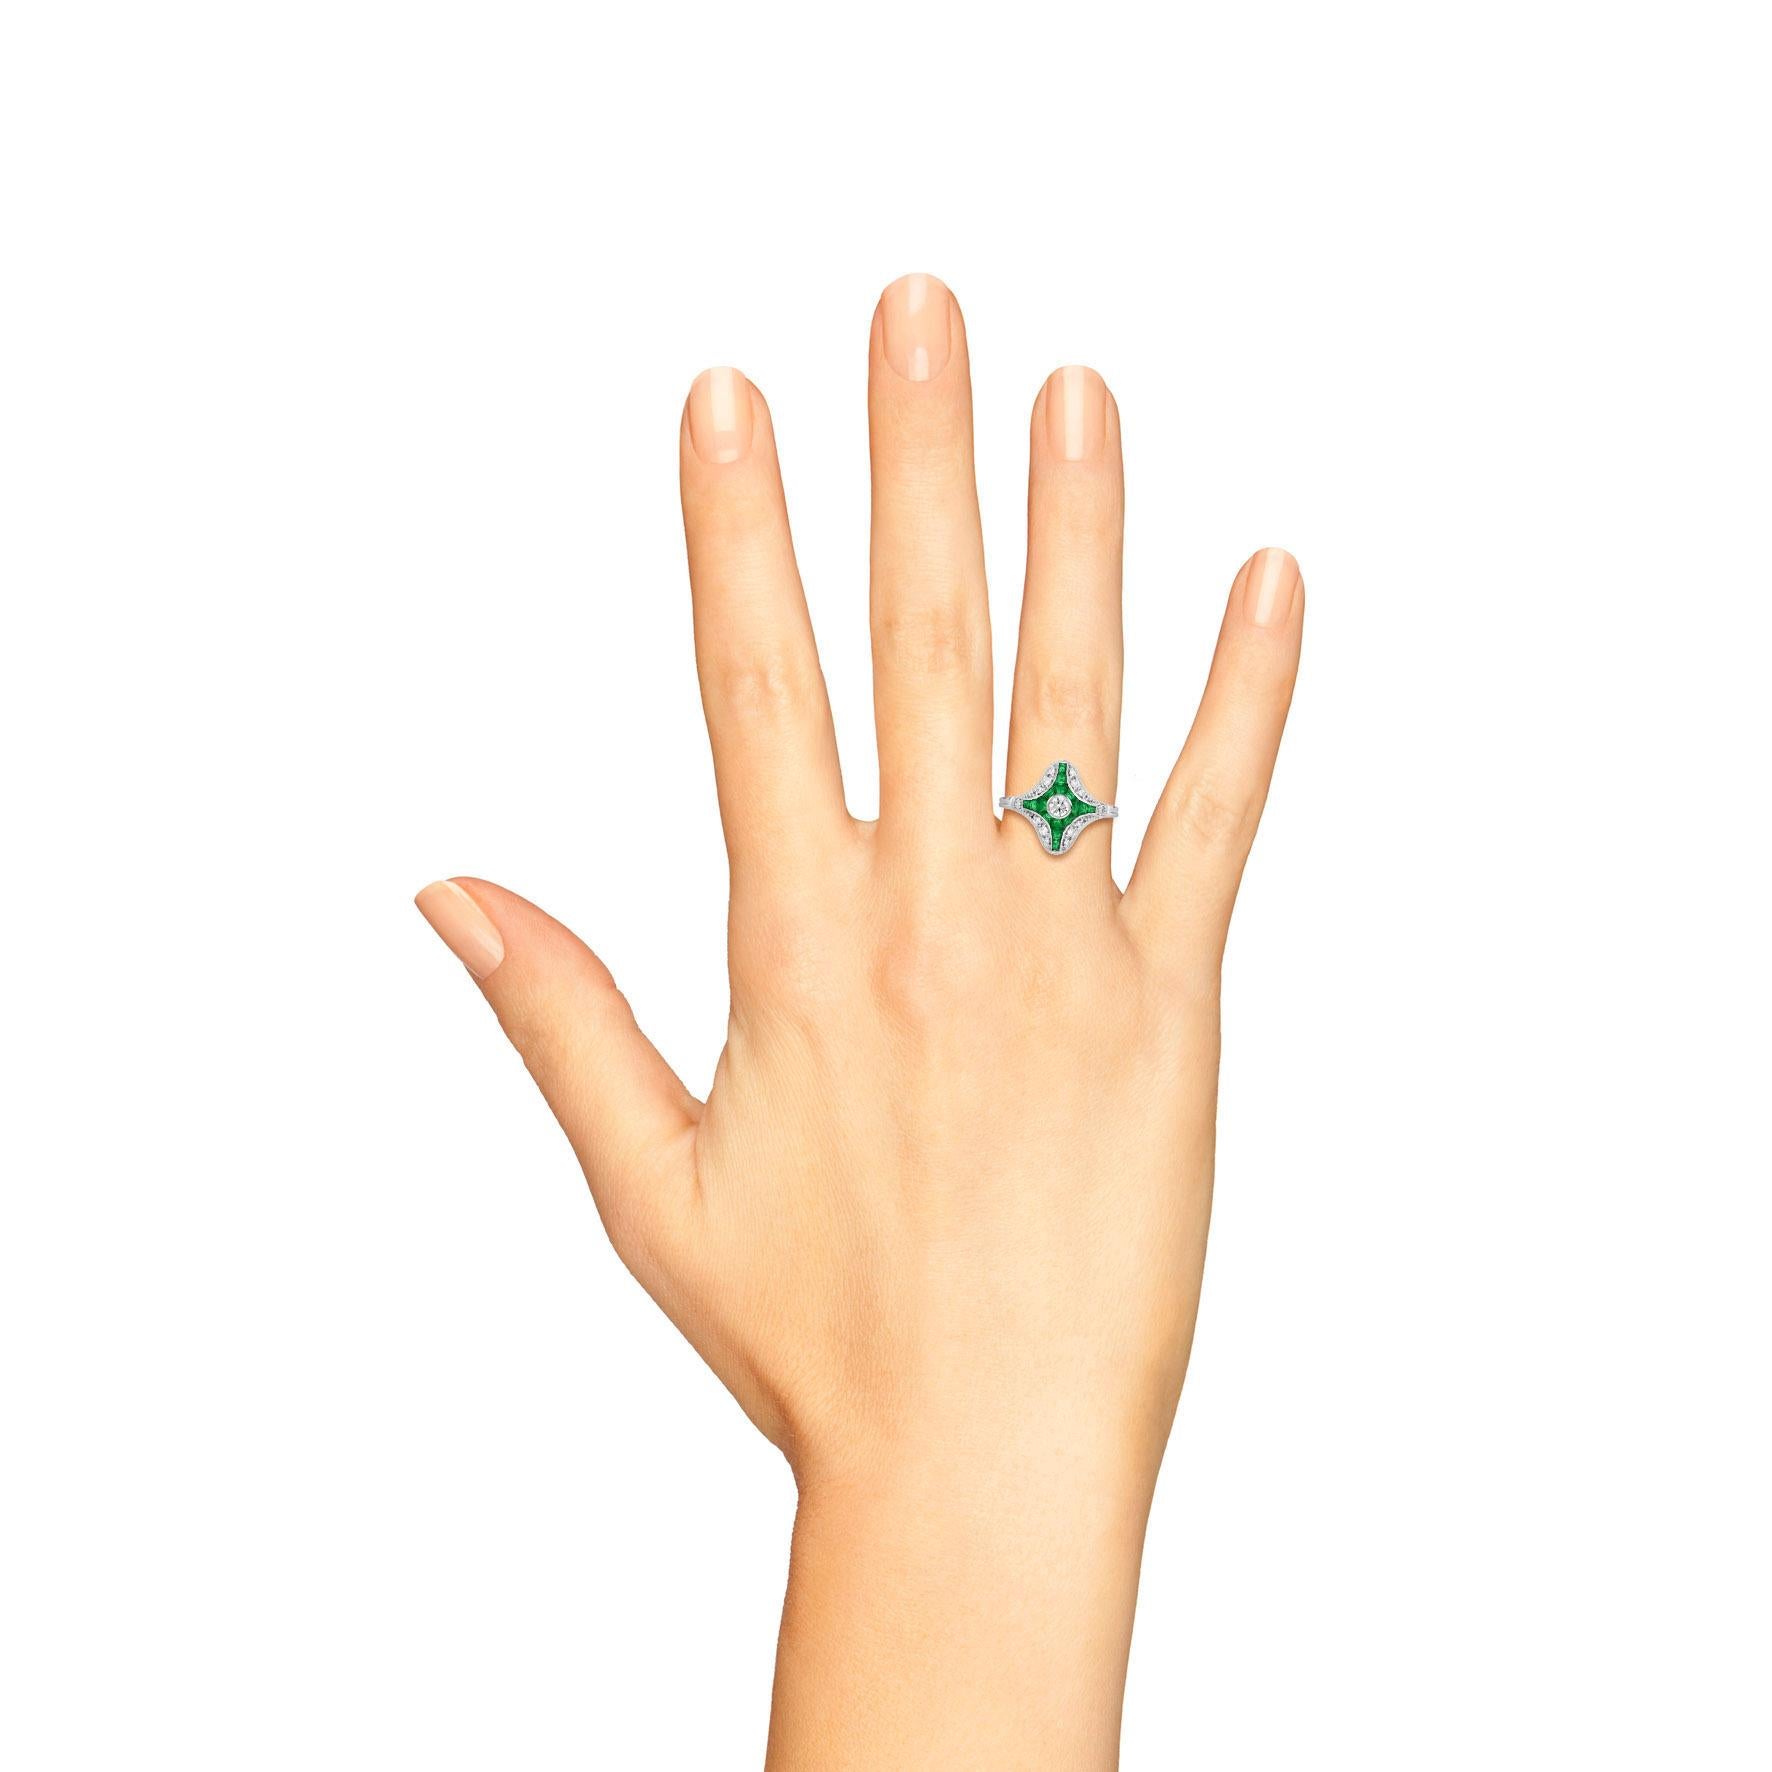 For Sale:  Diamond and Emerald Art Deco Style Ring in 14K white Gold 2